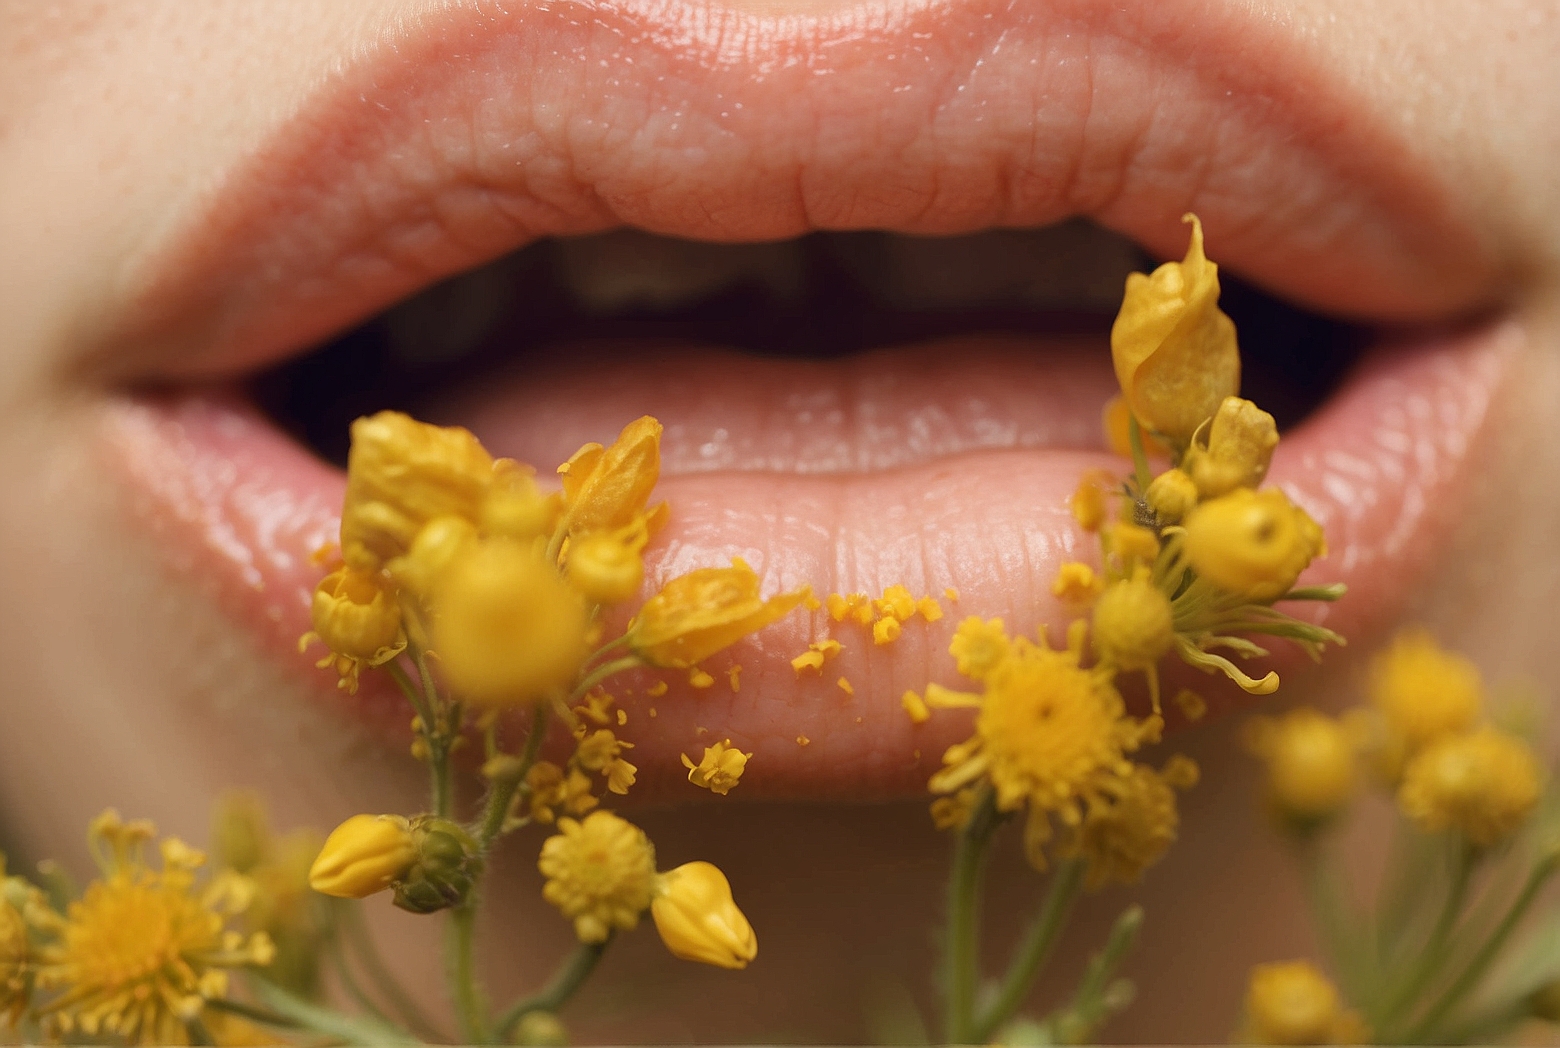 How to Soothe Beewax Allergy Symptoms on Lips